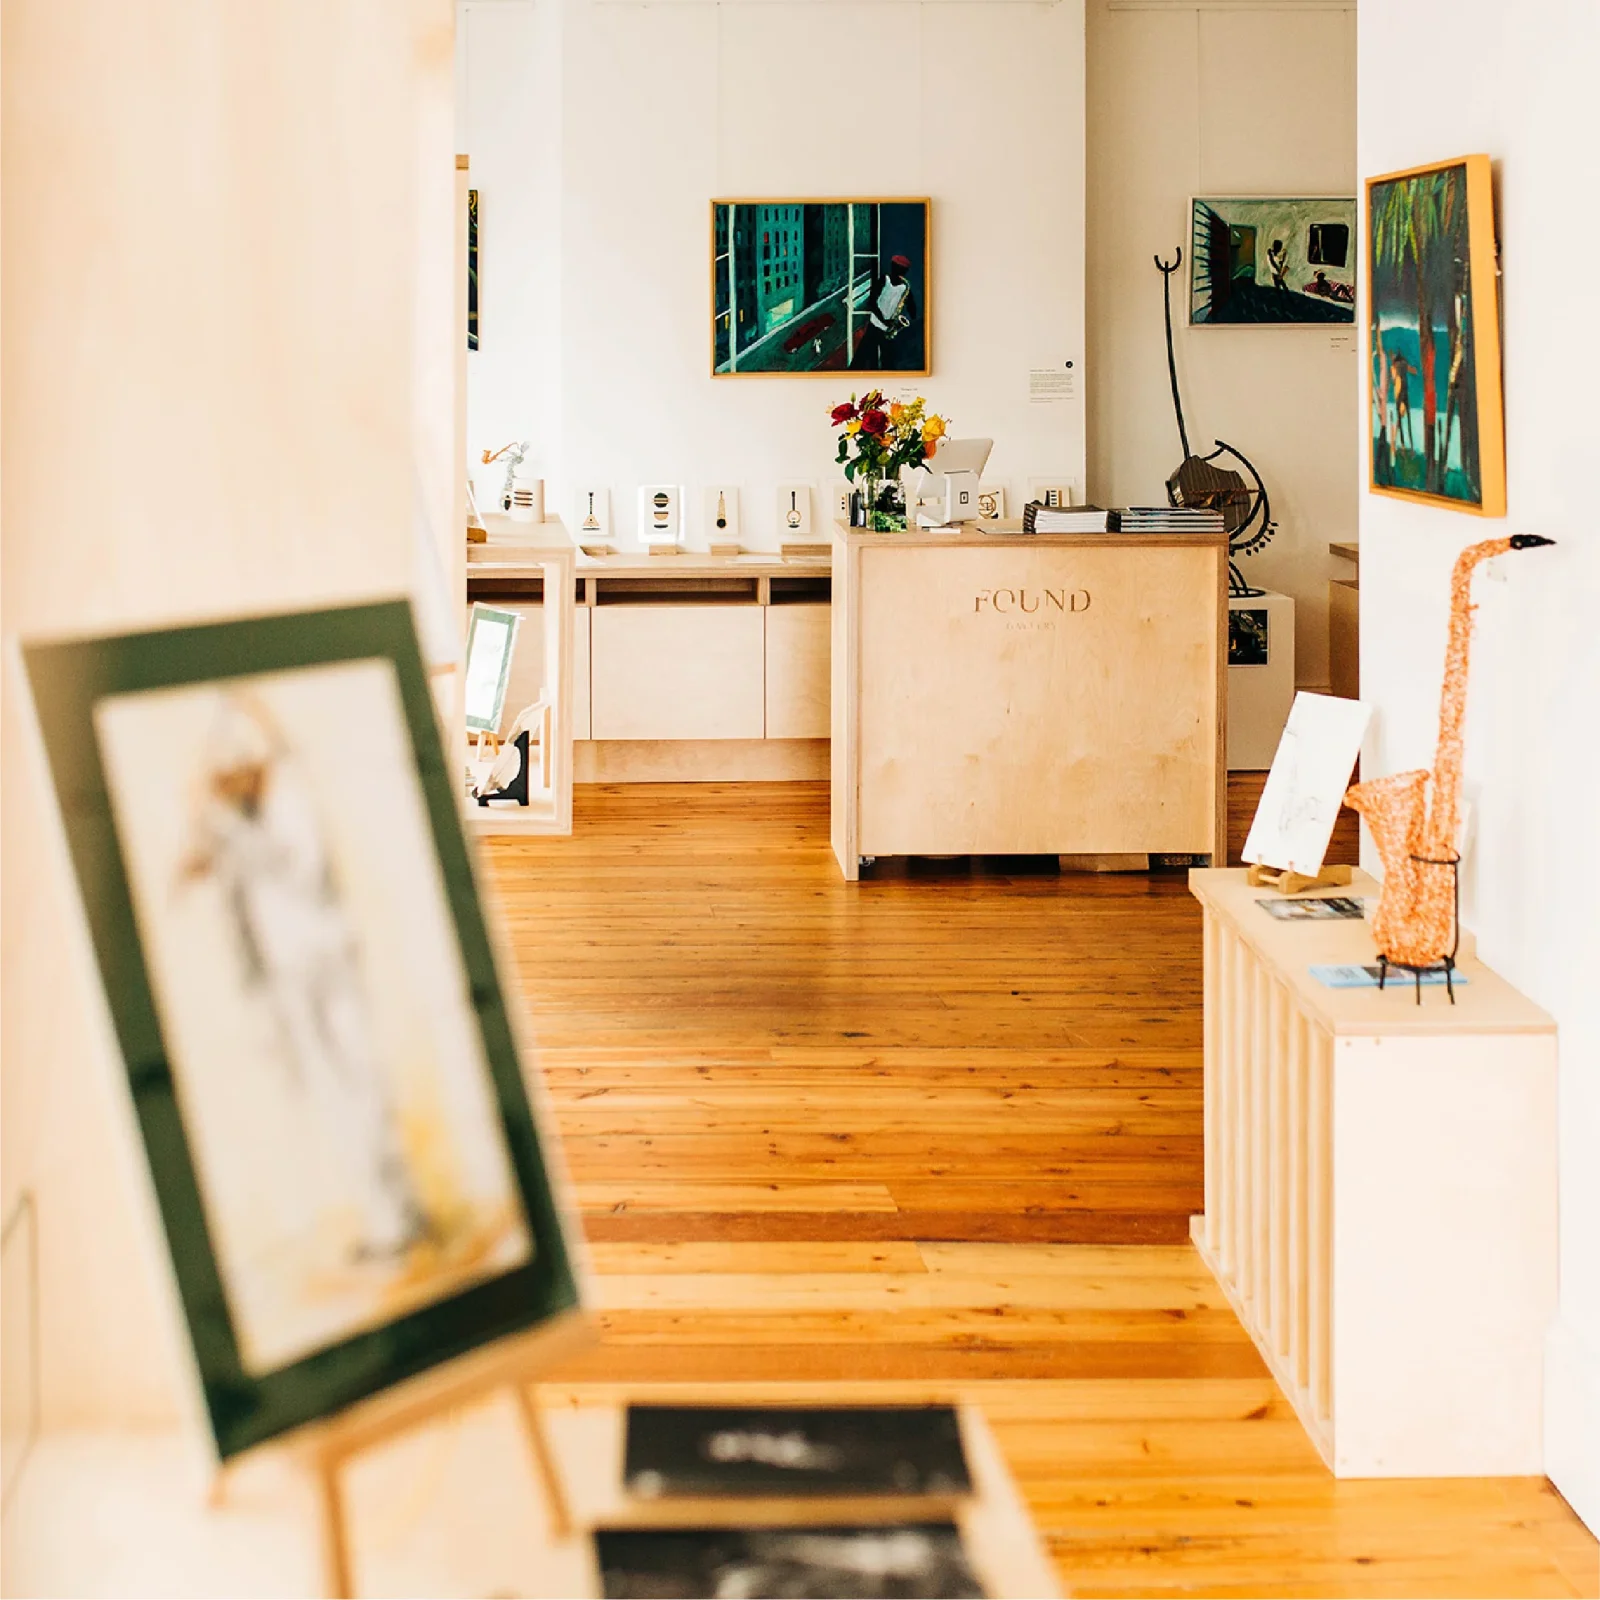 A warm, welcoming art gallery with wooden floors showcasing various artworks and sculptures. A reception desk labeled 